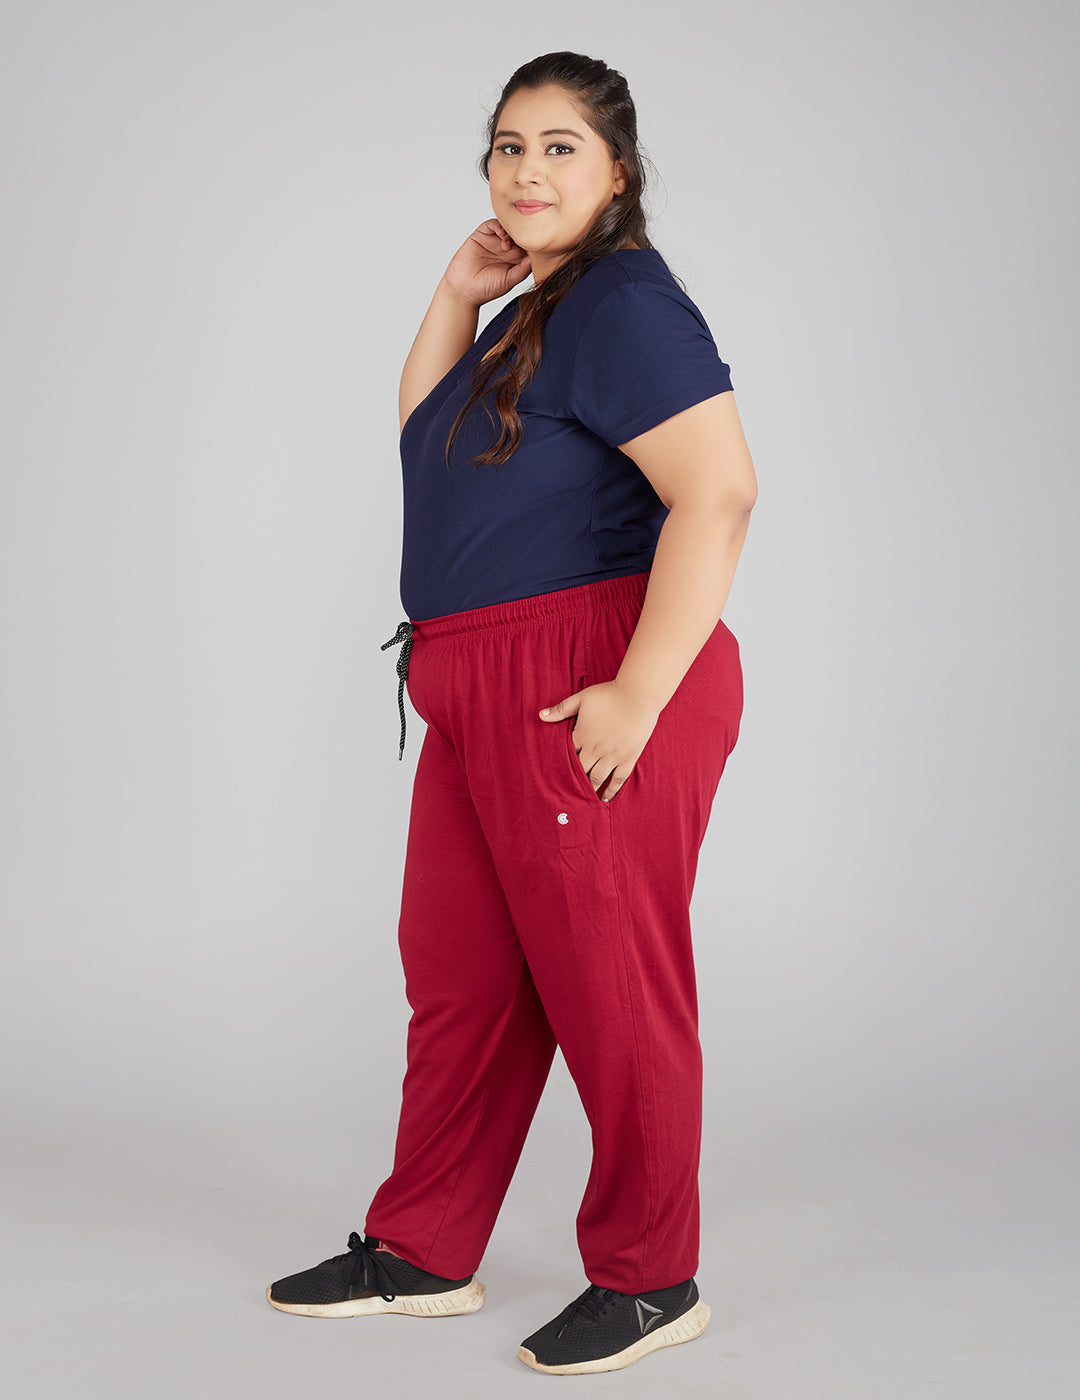 Stylish Plum Cotton Track Pants For Women Online In India